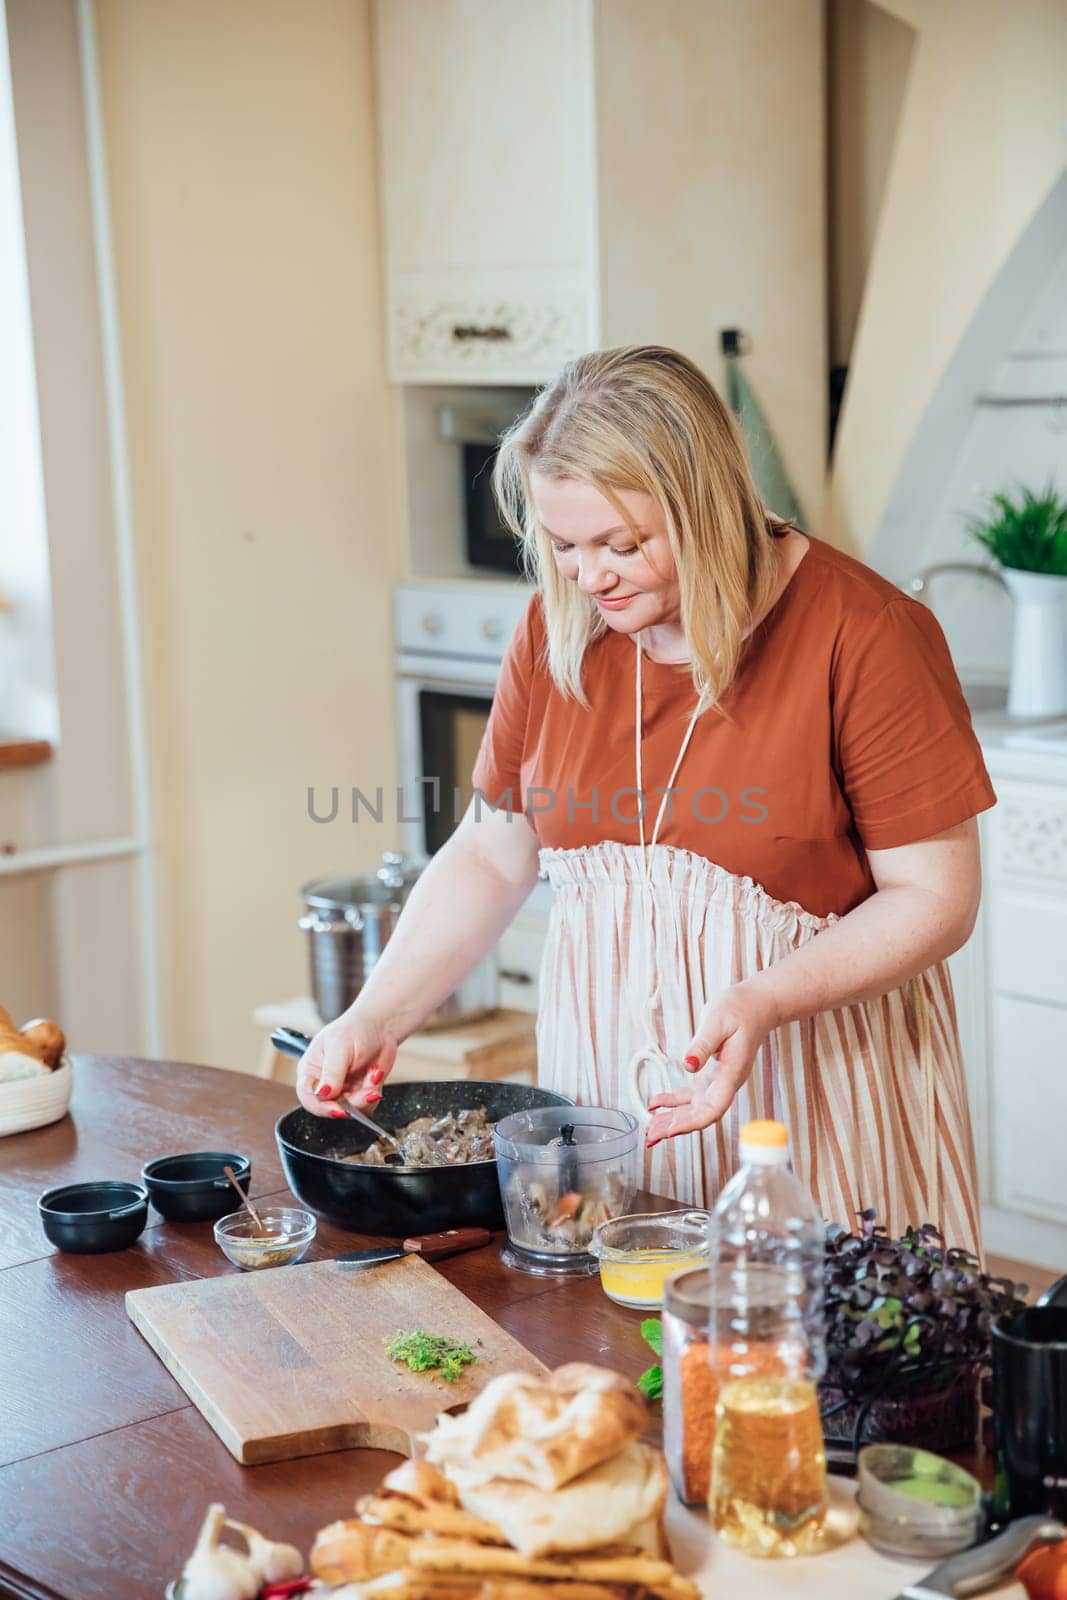 Woman cook at home in kitchen preparing food